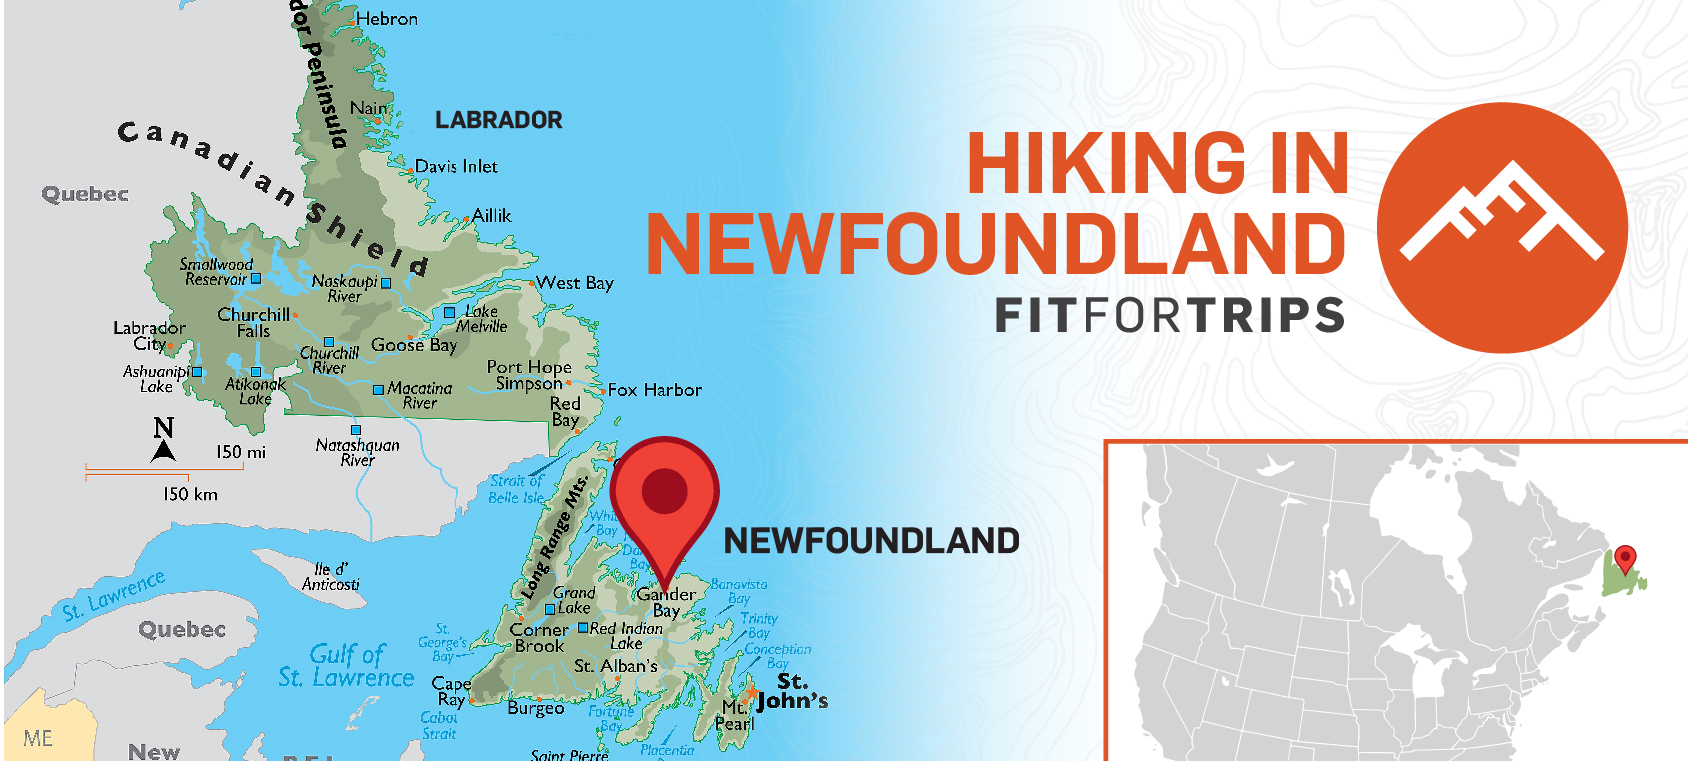 Location of Newfoundland for hikers to see.